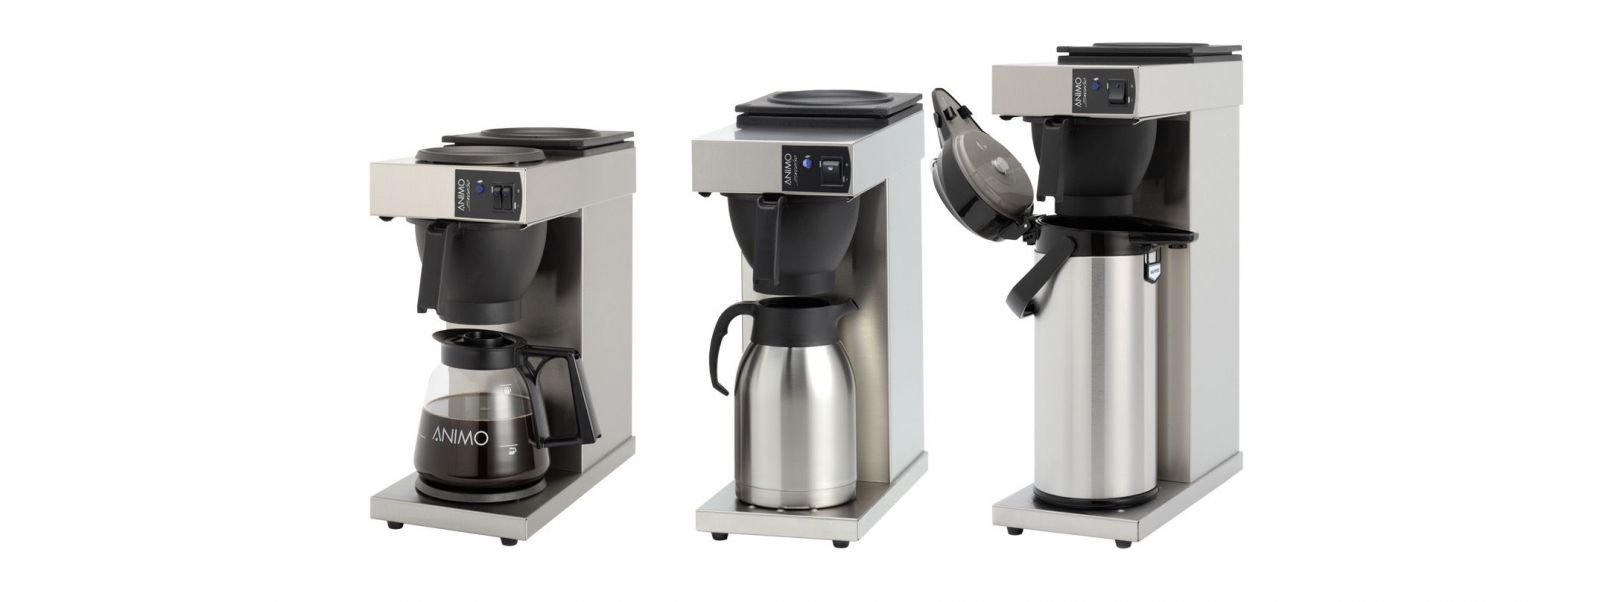 Animo Excelso Coffee Maker